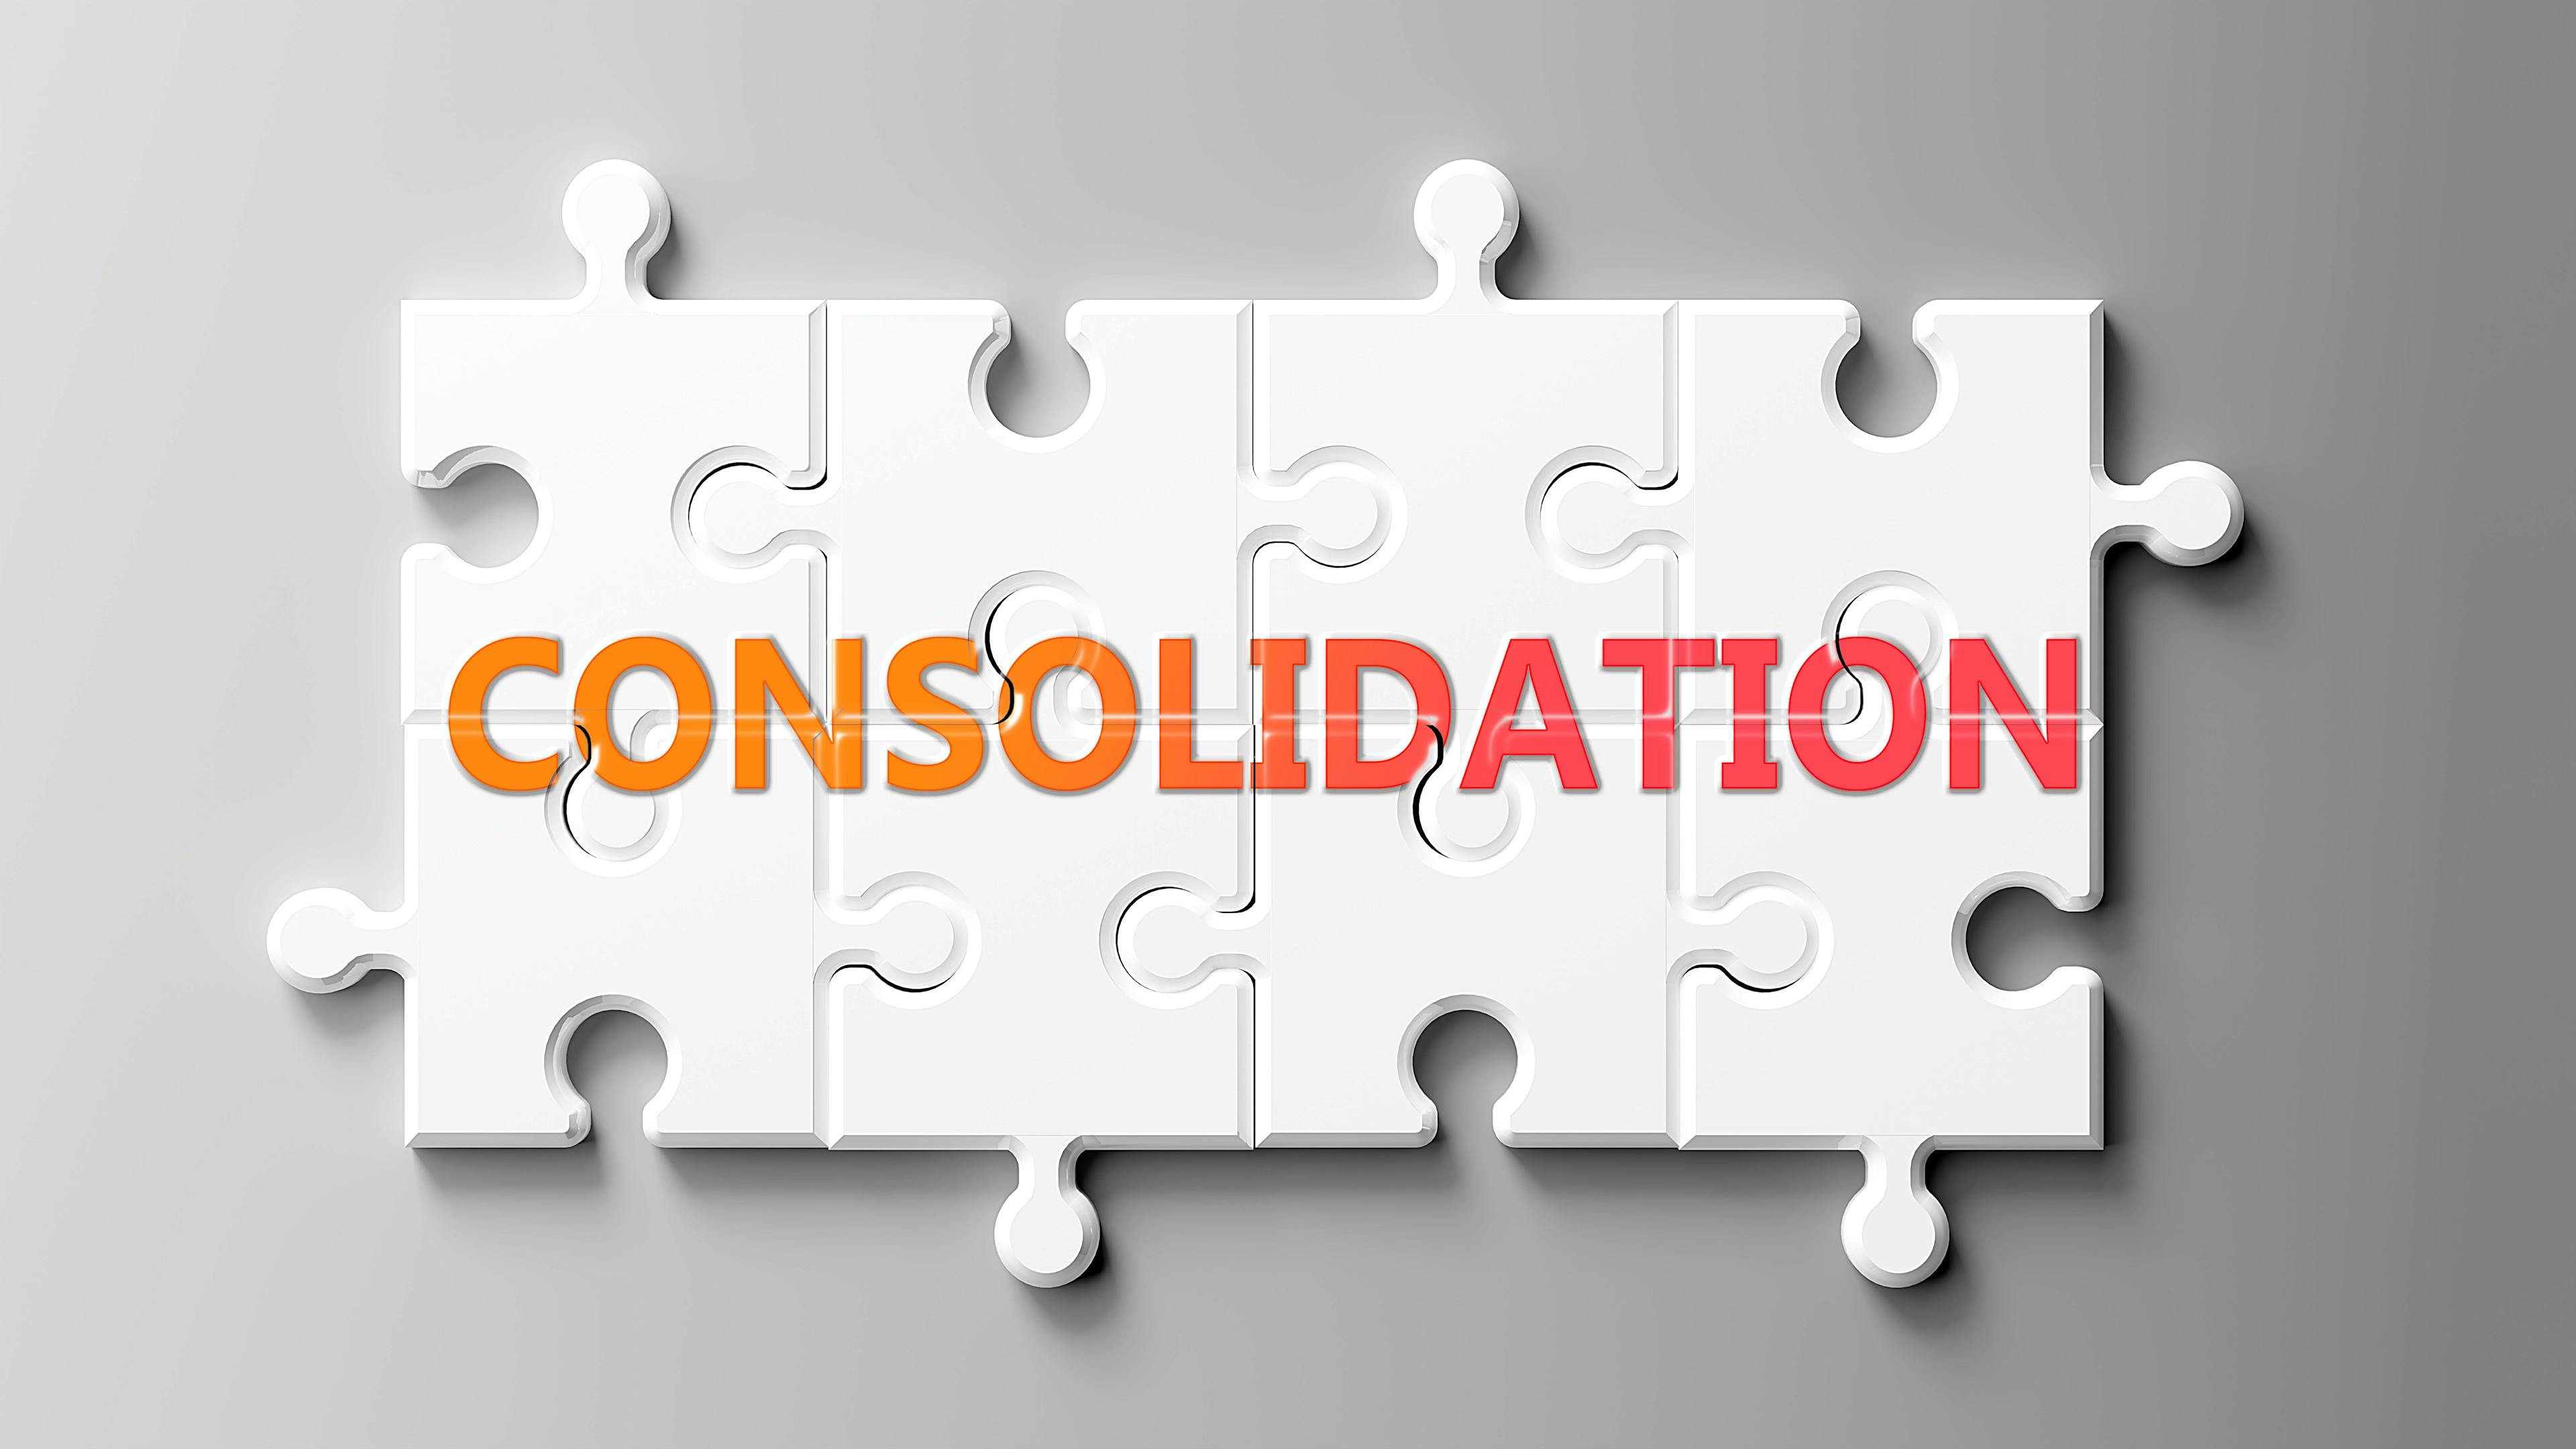 CONSOLIDATION puzzle